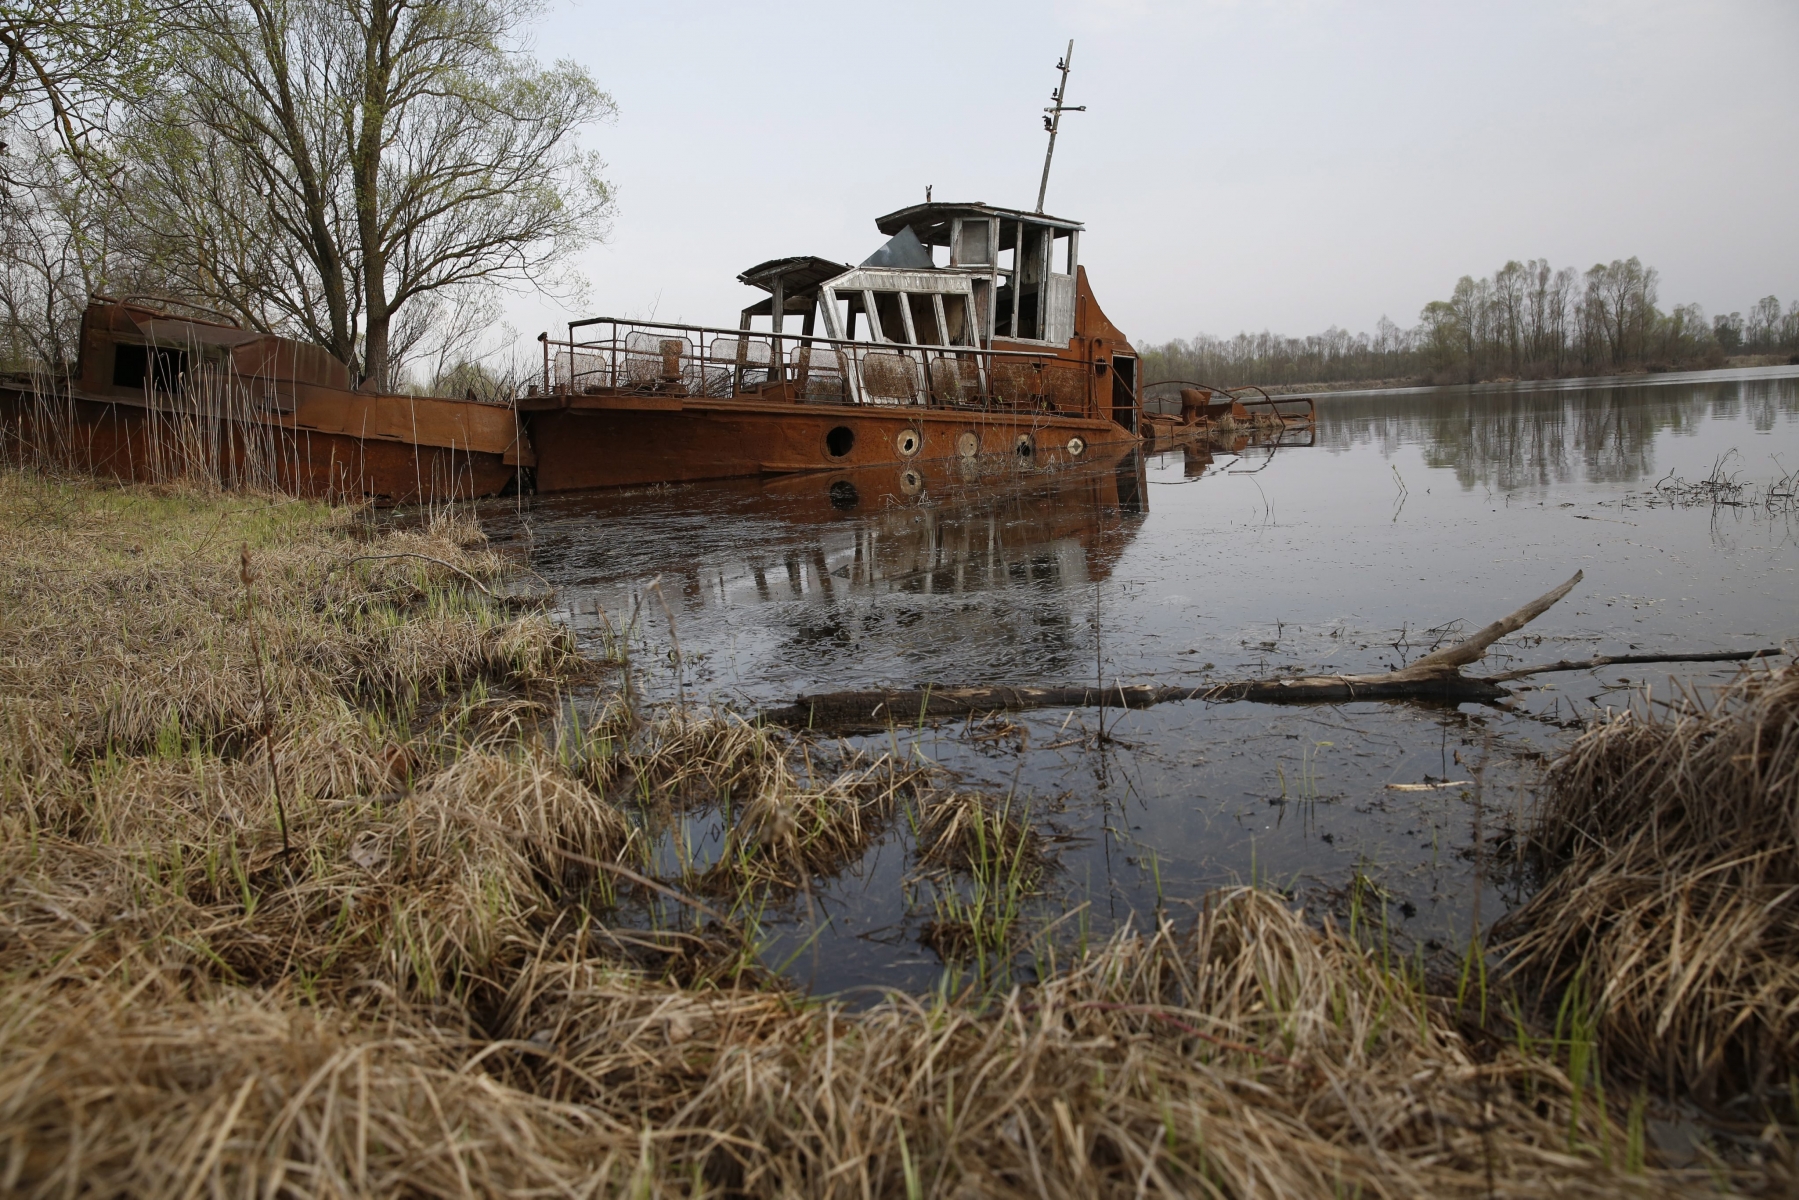 epa05265098 (14/22) An old barge is seen at the dead channel of Pripyat river in the state radiation ecology reserve in the 30 km exclusion zone around the Chernobyl nuclear reactor, some 390 km from Minsk, Belarus, 12 April 2016. 30 years have passed since the accident and life has not returned to normal in the disaster-affected area. The levels of radiation remain high in the surroundings of the nuclear plant, though life does seem to be slowly recovering. There are very few people living in the villages near the Chernobyl nuclear site, and much of the land is gradually being turned into farmers fields. The flora and fauna is present and alive and a farm is operating 37 kms away from the reactor site. The farm is located near a radiation ecology reserve and has more than 260 horses and 55 cows being raised for sale there. Workers of the reserve claim that during all activities, the content of radionuclides is monitored.  EPA/TATYANA ZENKOVICH PLEASE REFER TO ADVISORY NOTICE (epa05265